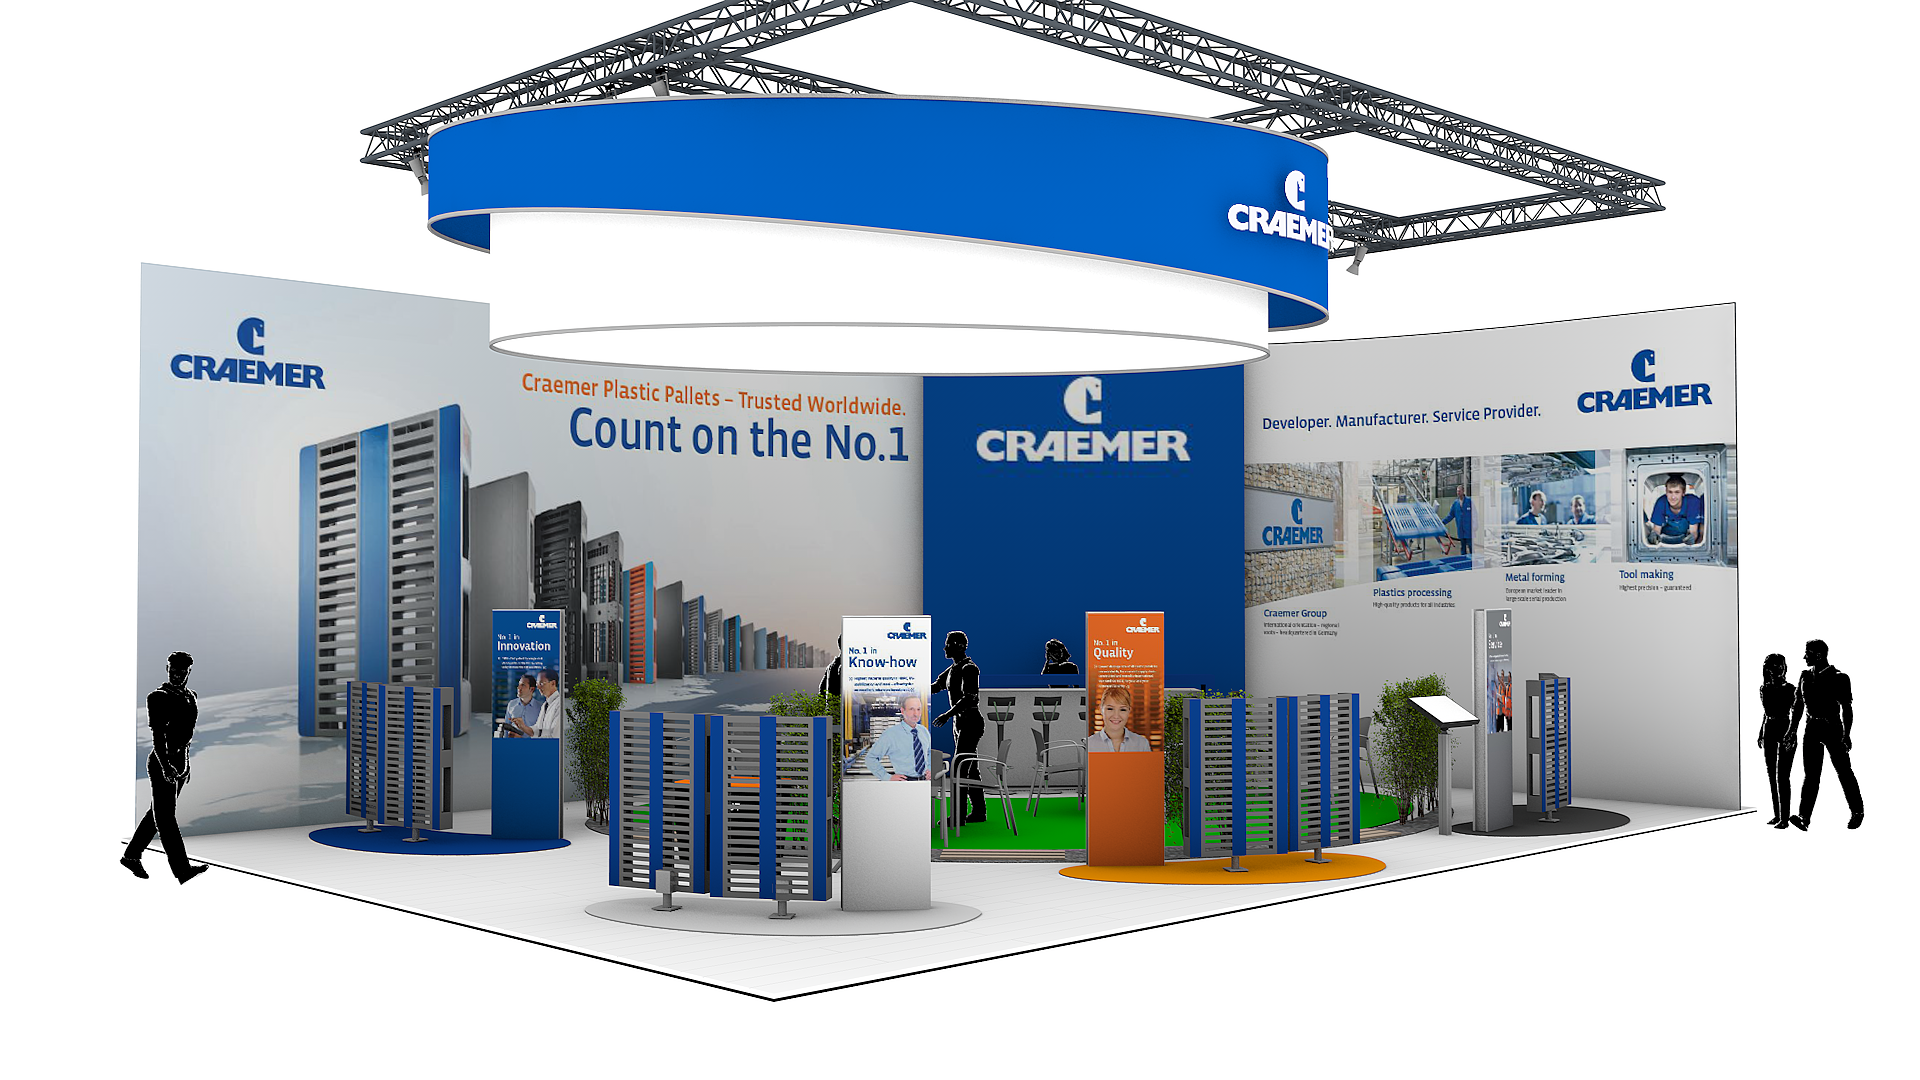 Craemer showcases "Plastic Pallets Worldwide" at Interpack 2014